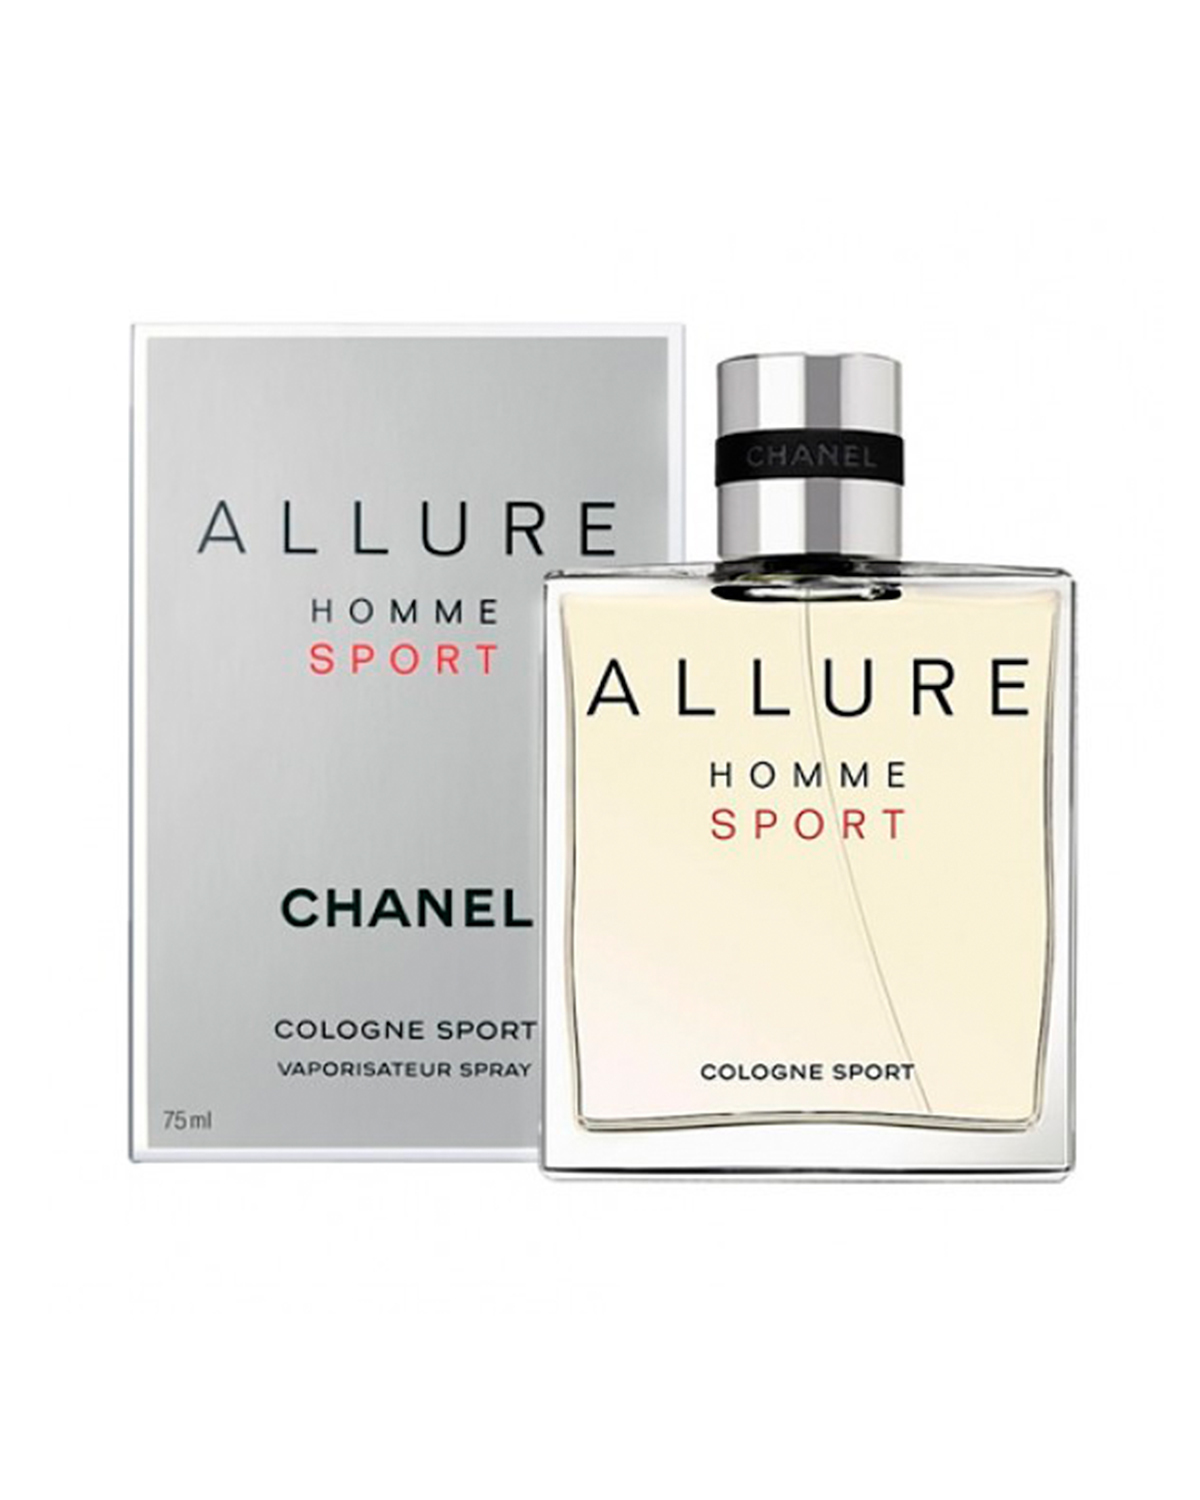 Allure homme cologne. Chanel Allure 100ml (m). Chanel Allure 50ml (m). Chanel Allure homme Sport Cologne 100 ml. Chanel Allure Sport Cologne.